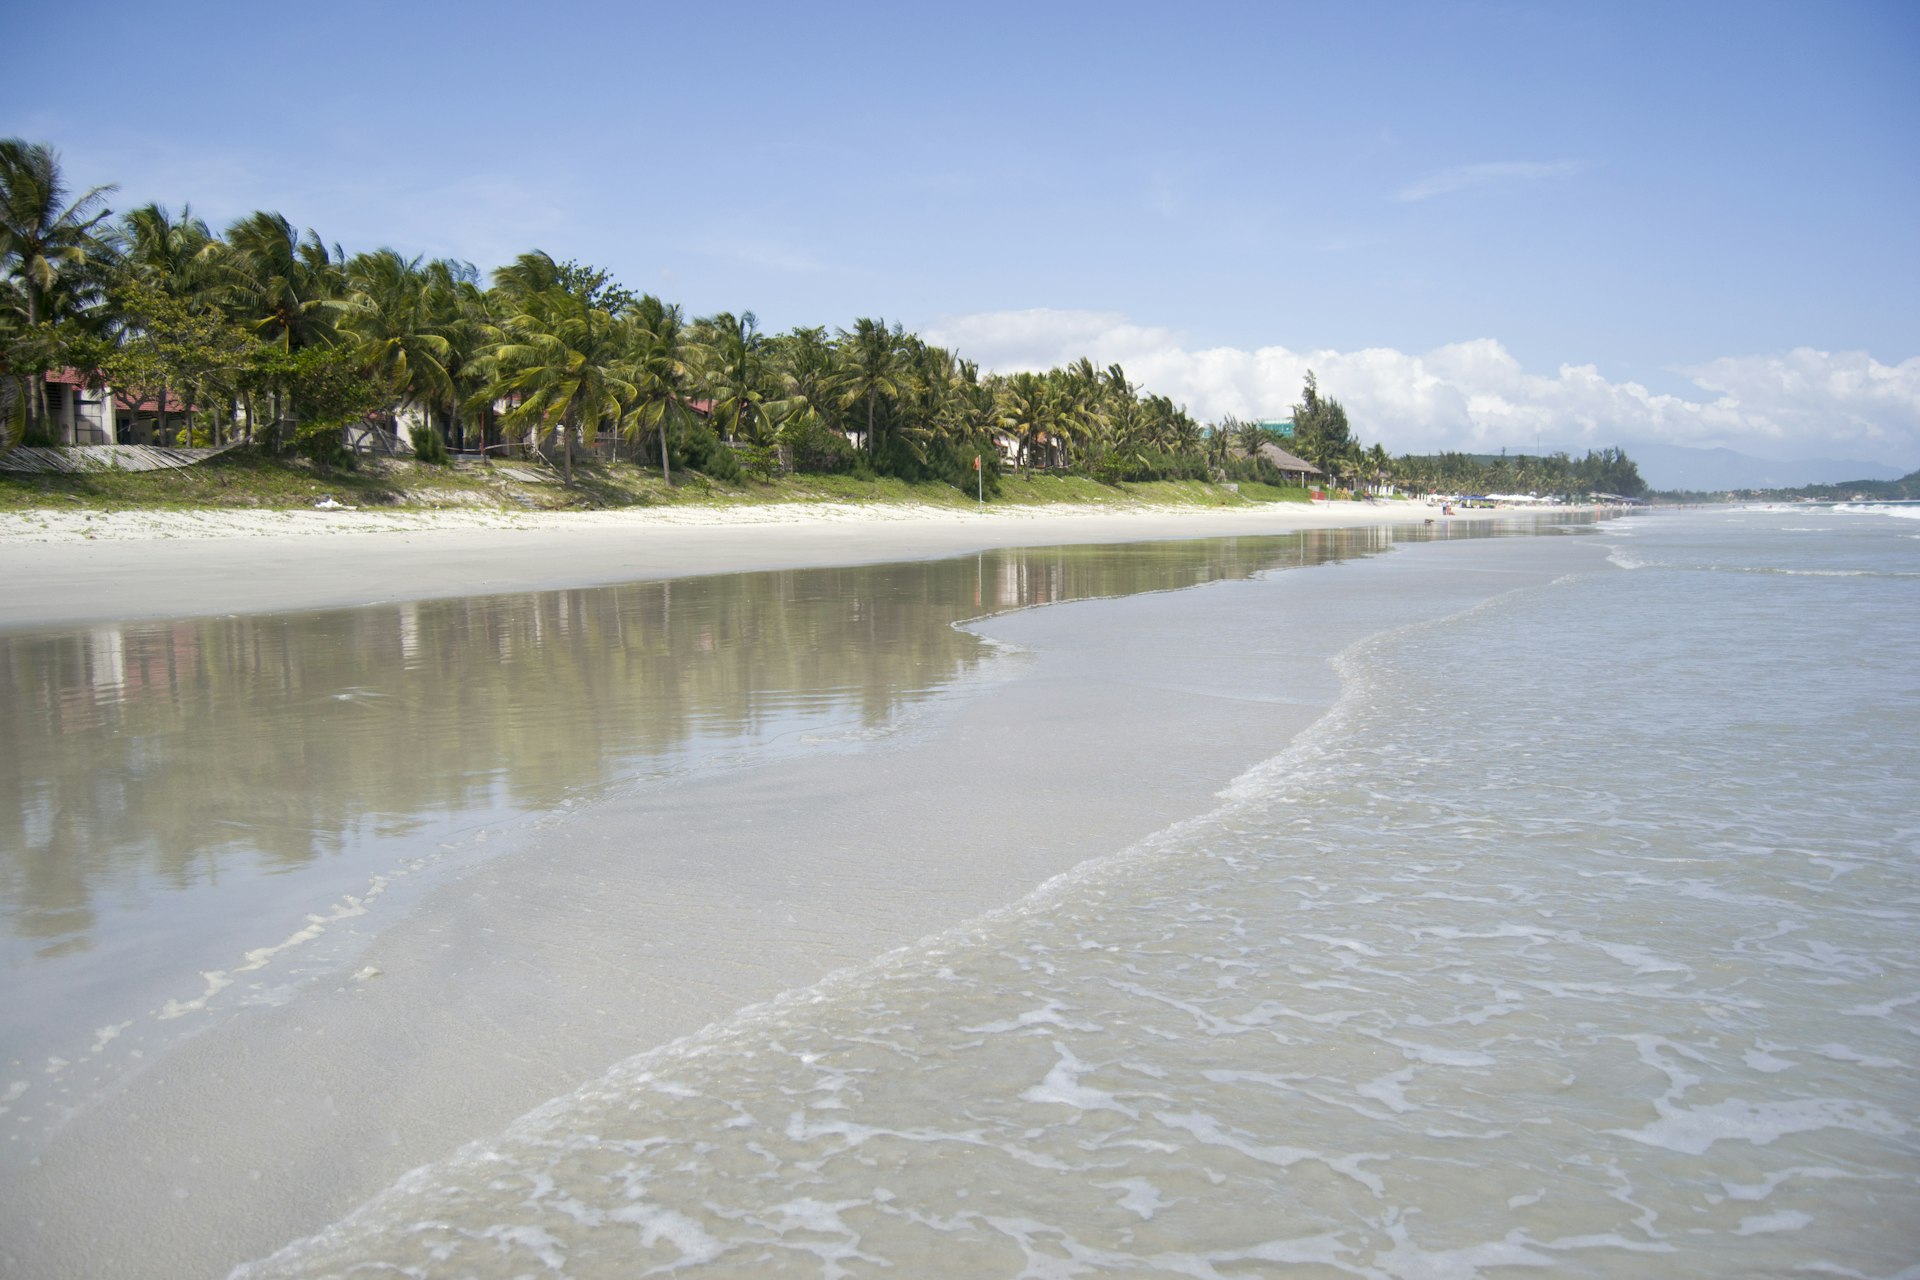 A view of Doc Let beach from the shallow waters. The beach has white sand and is backed by palm trees.